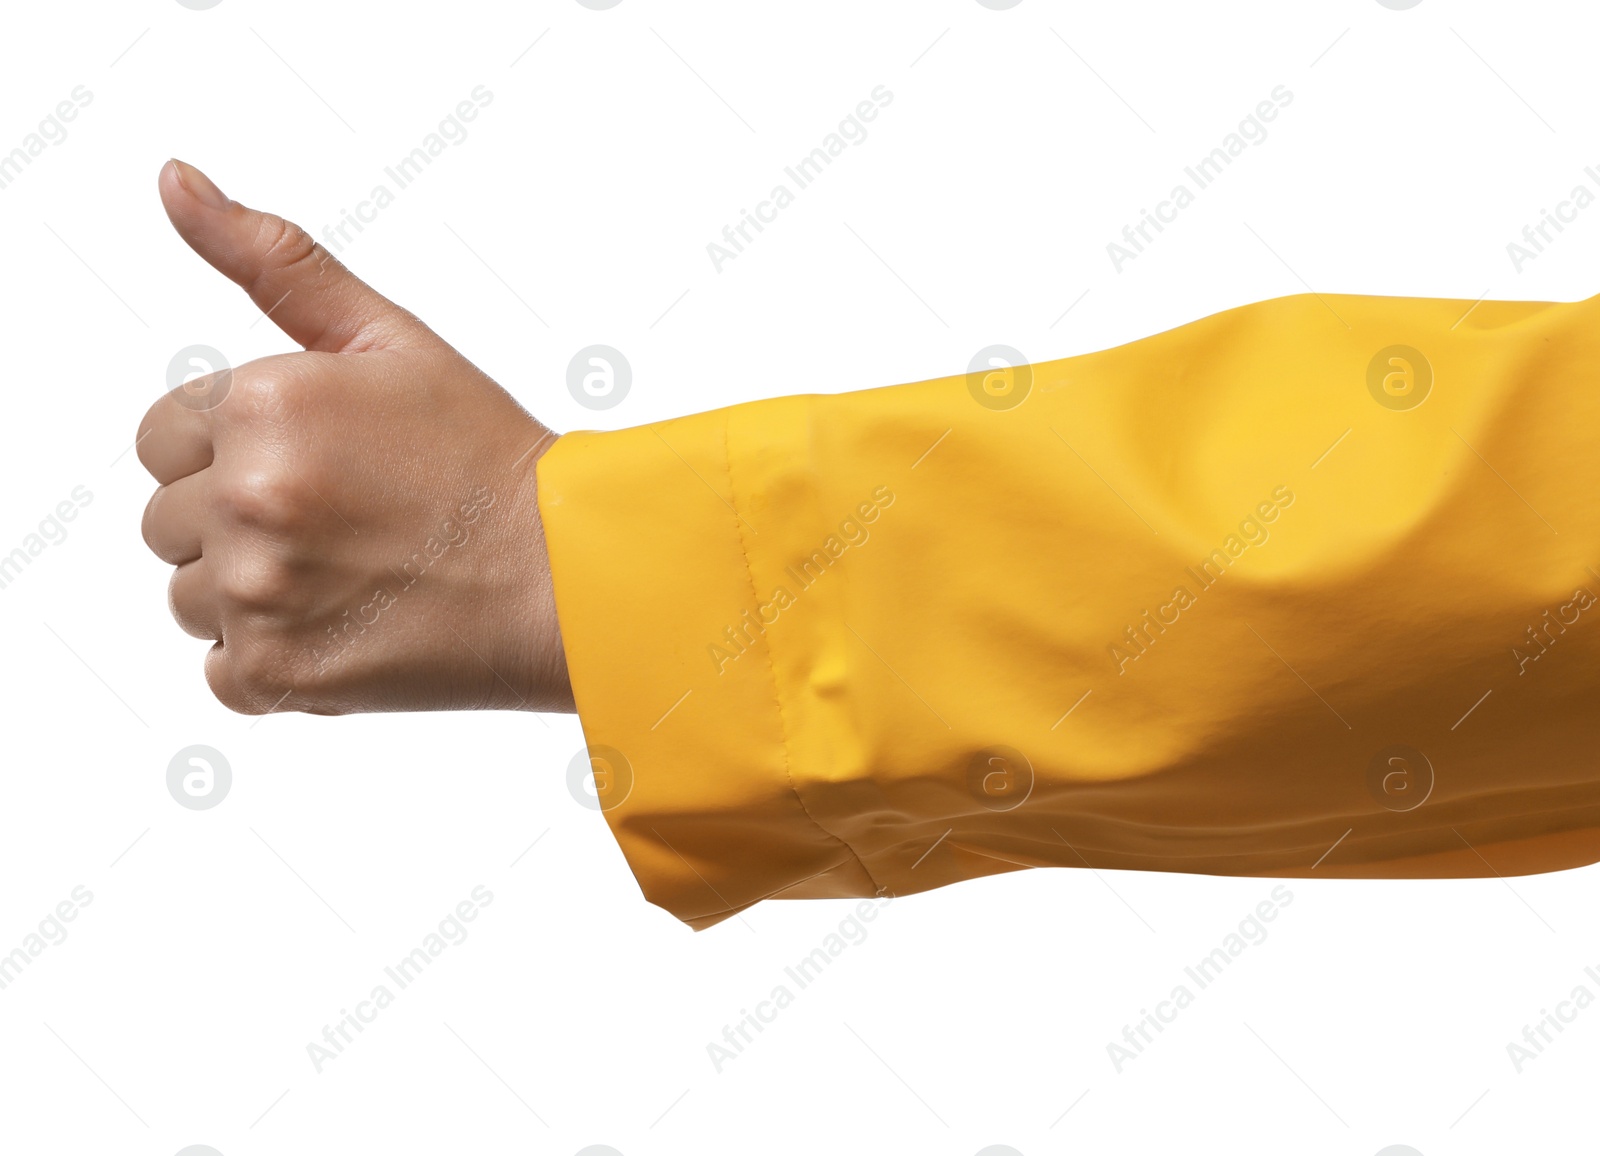 Photo of Woman showing hitchhiking gesture on white background, closeup